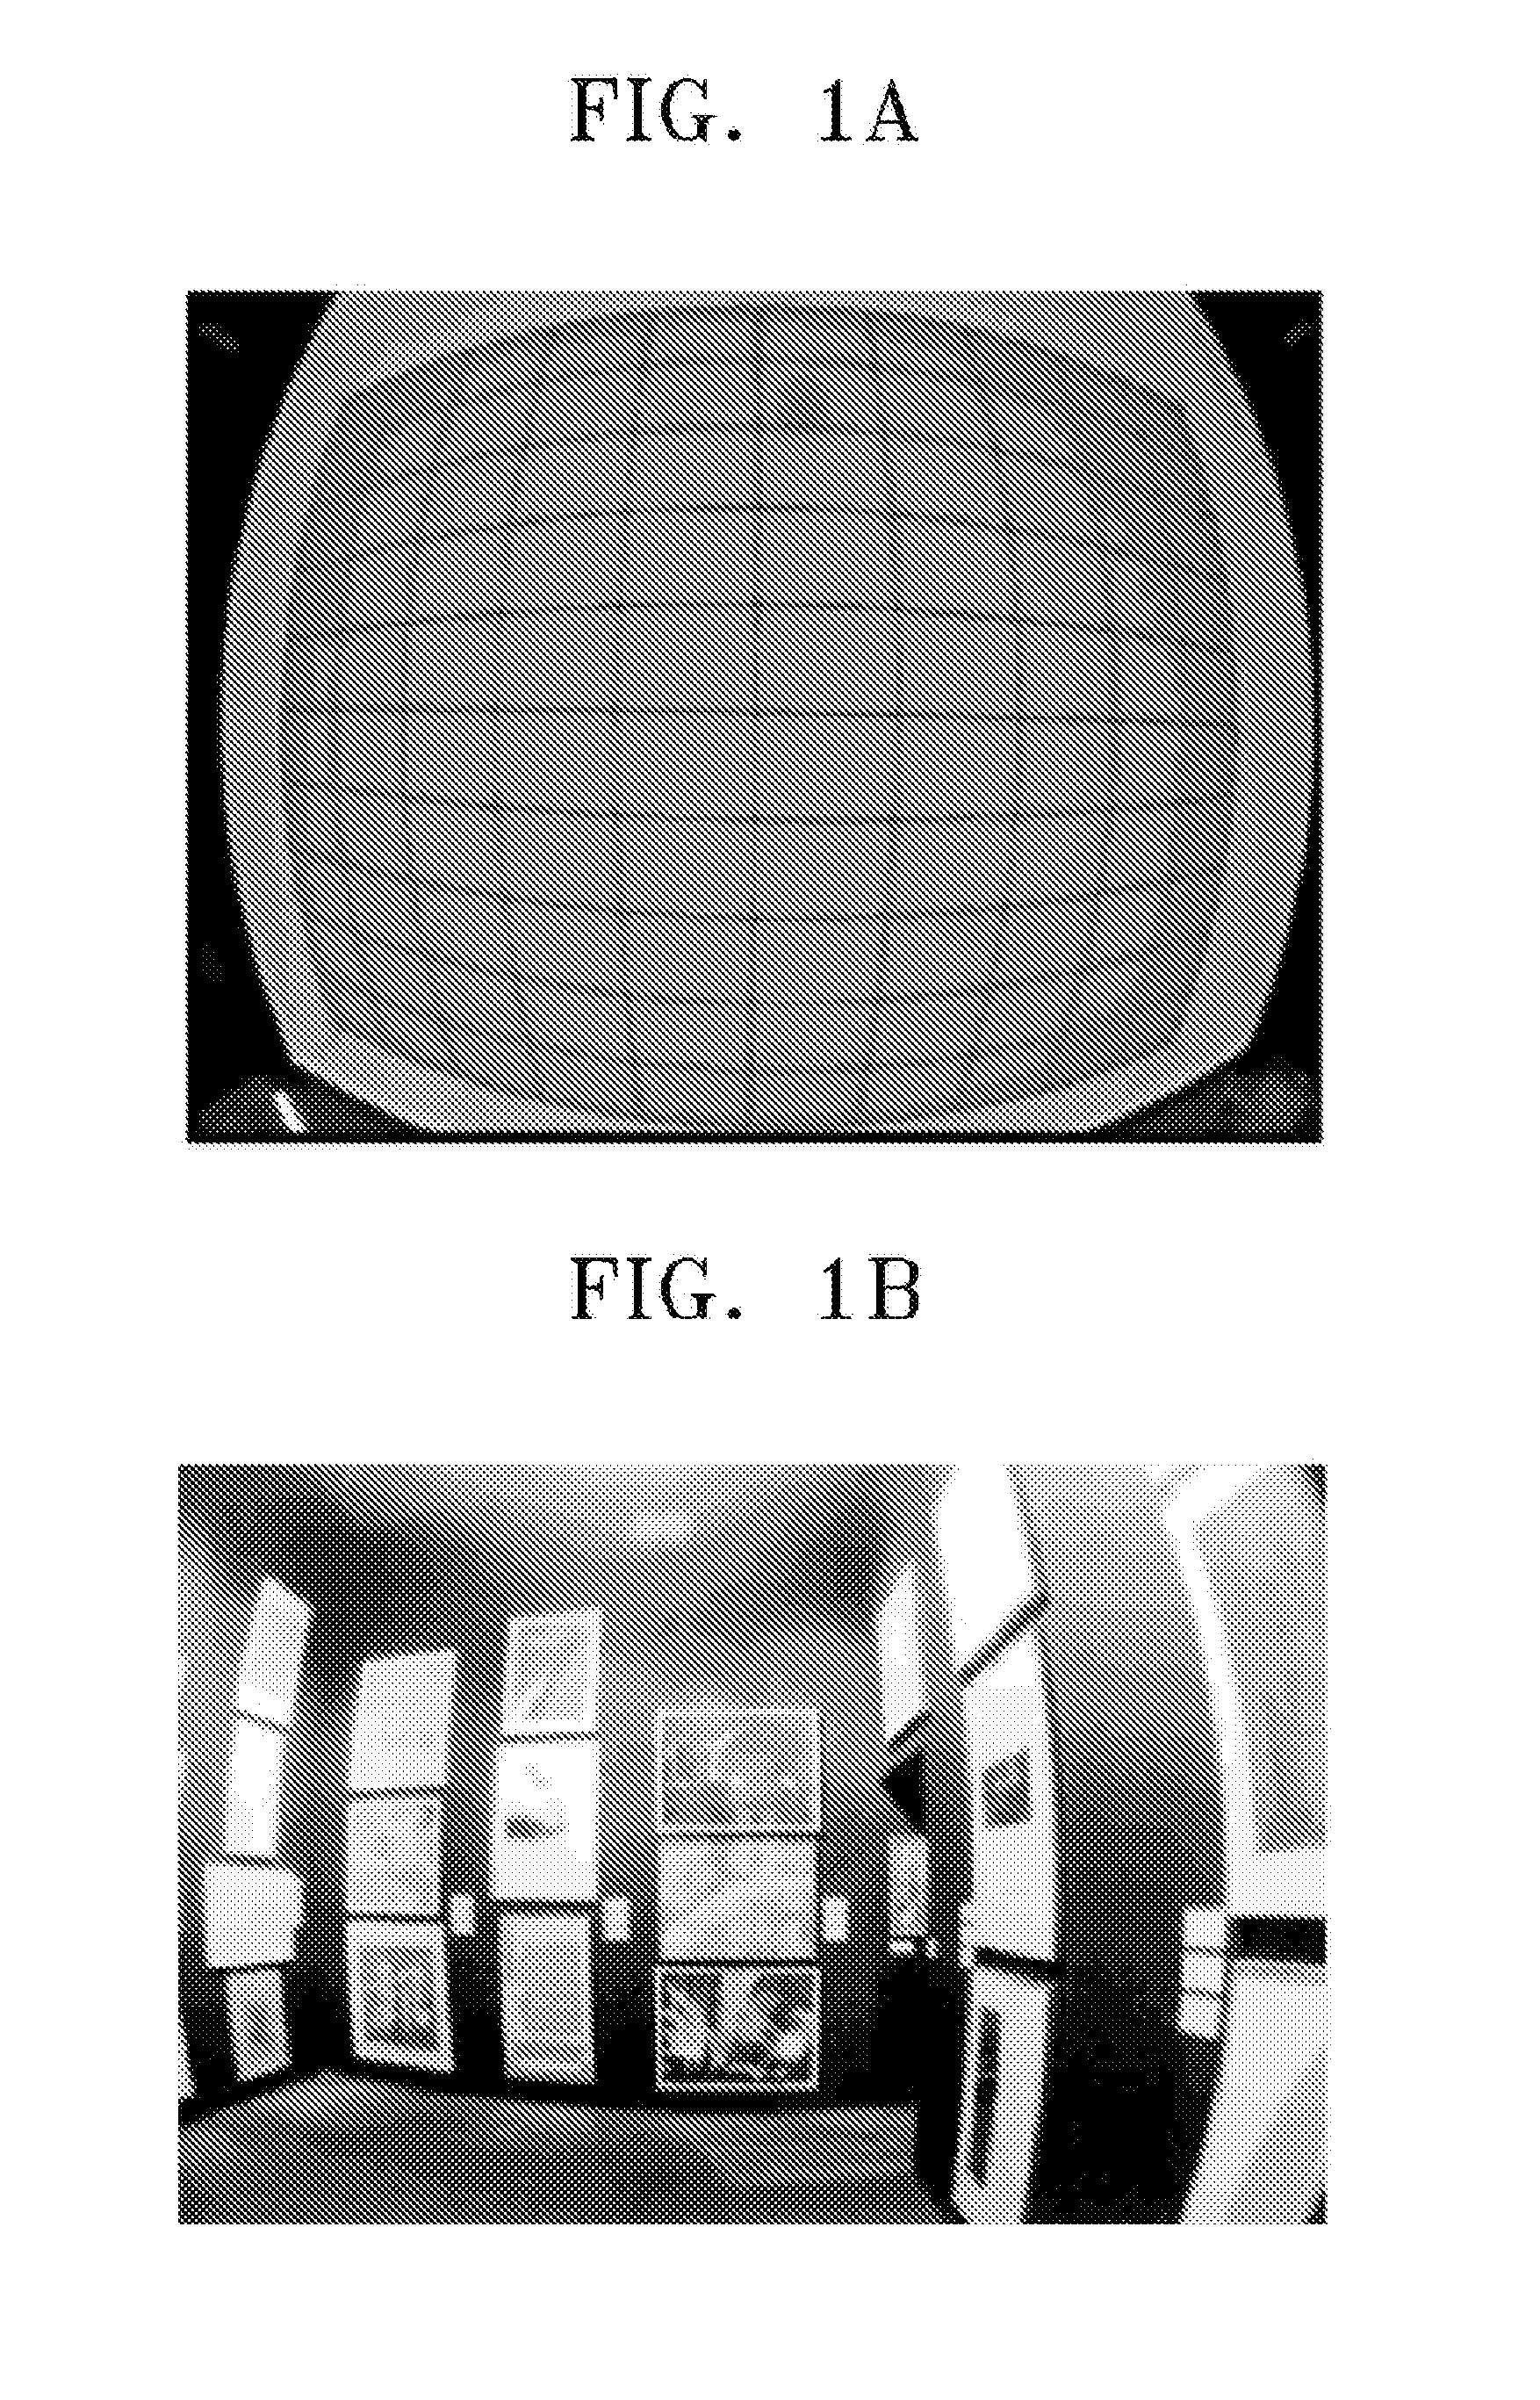 Method of correcting image distortion and apparatus for processing image using the method